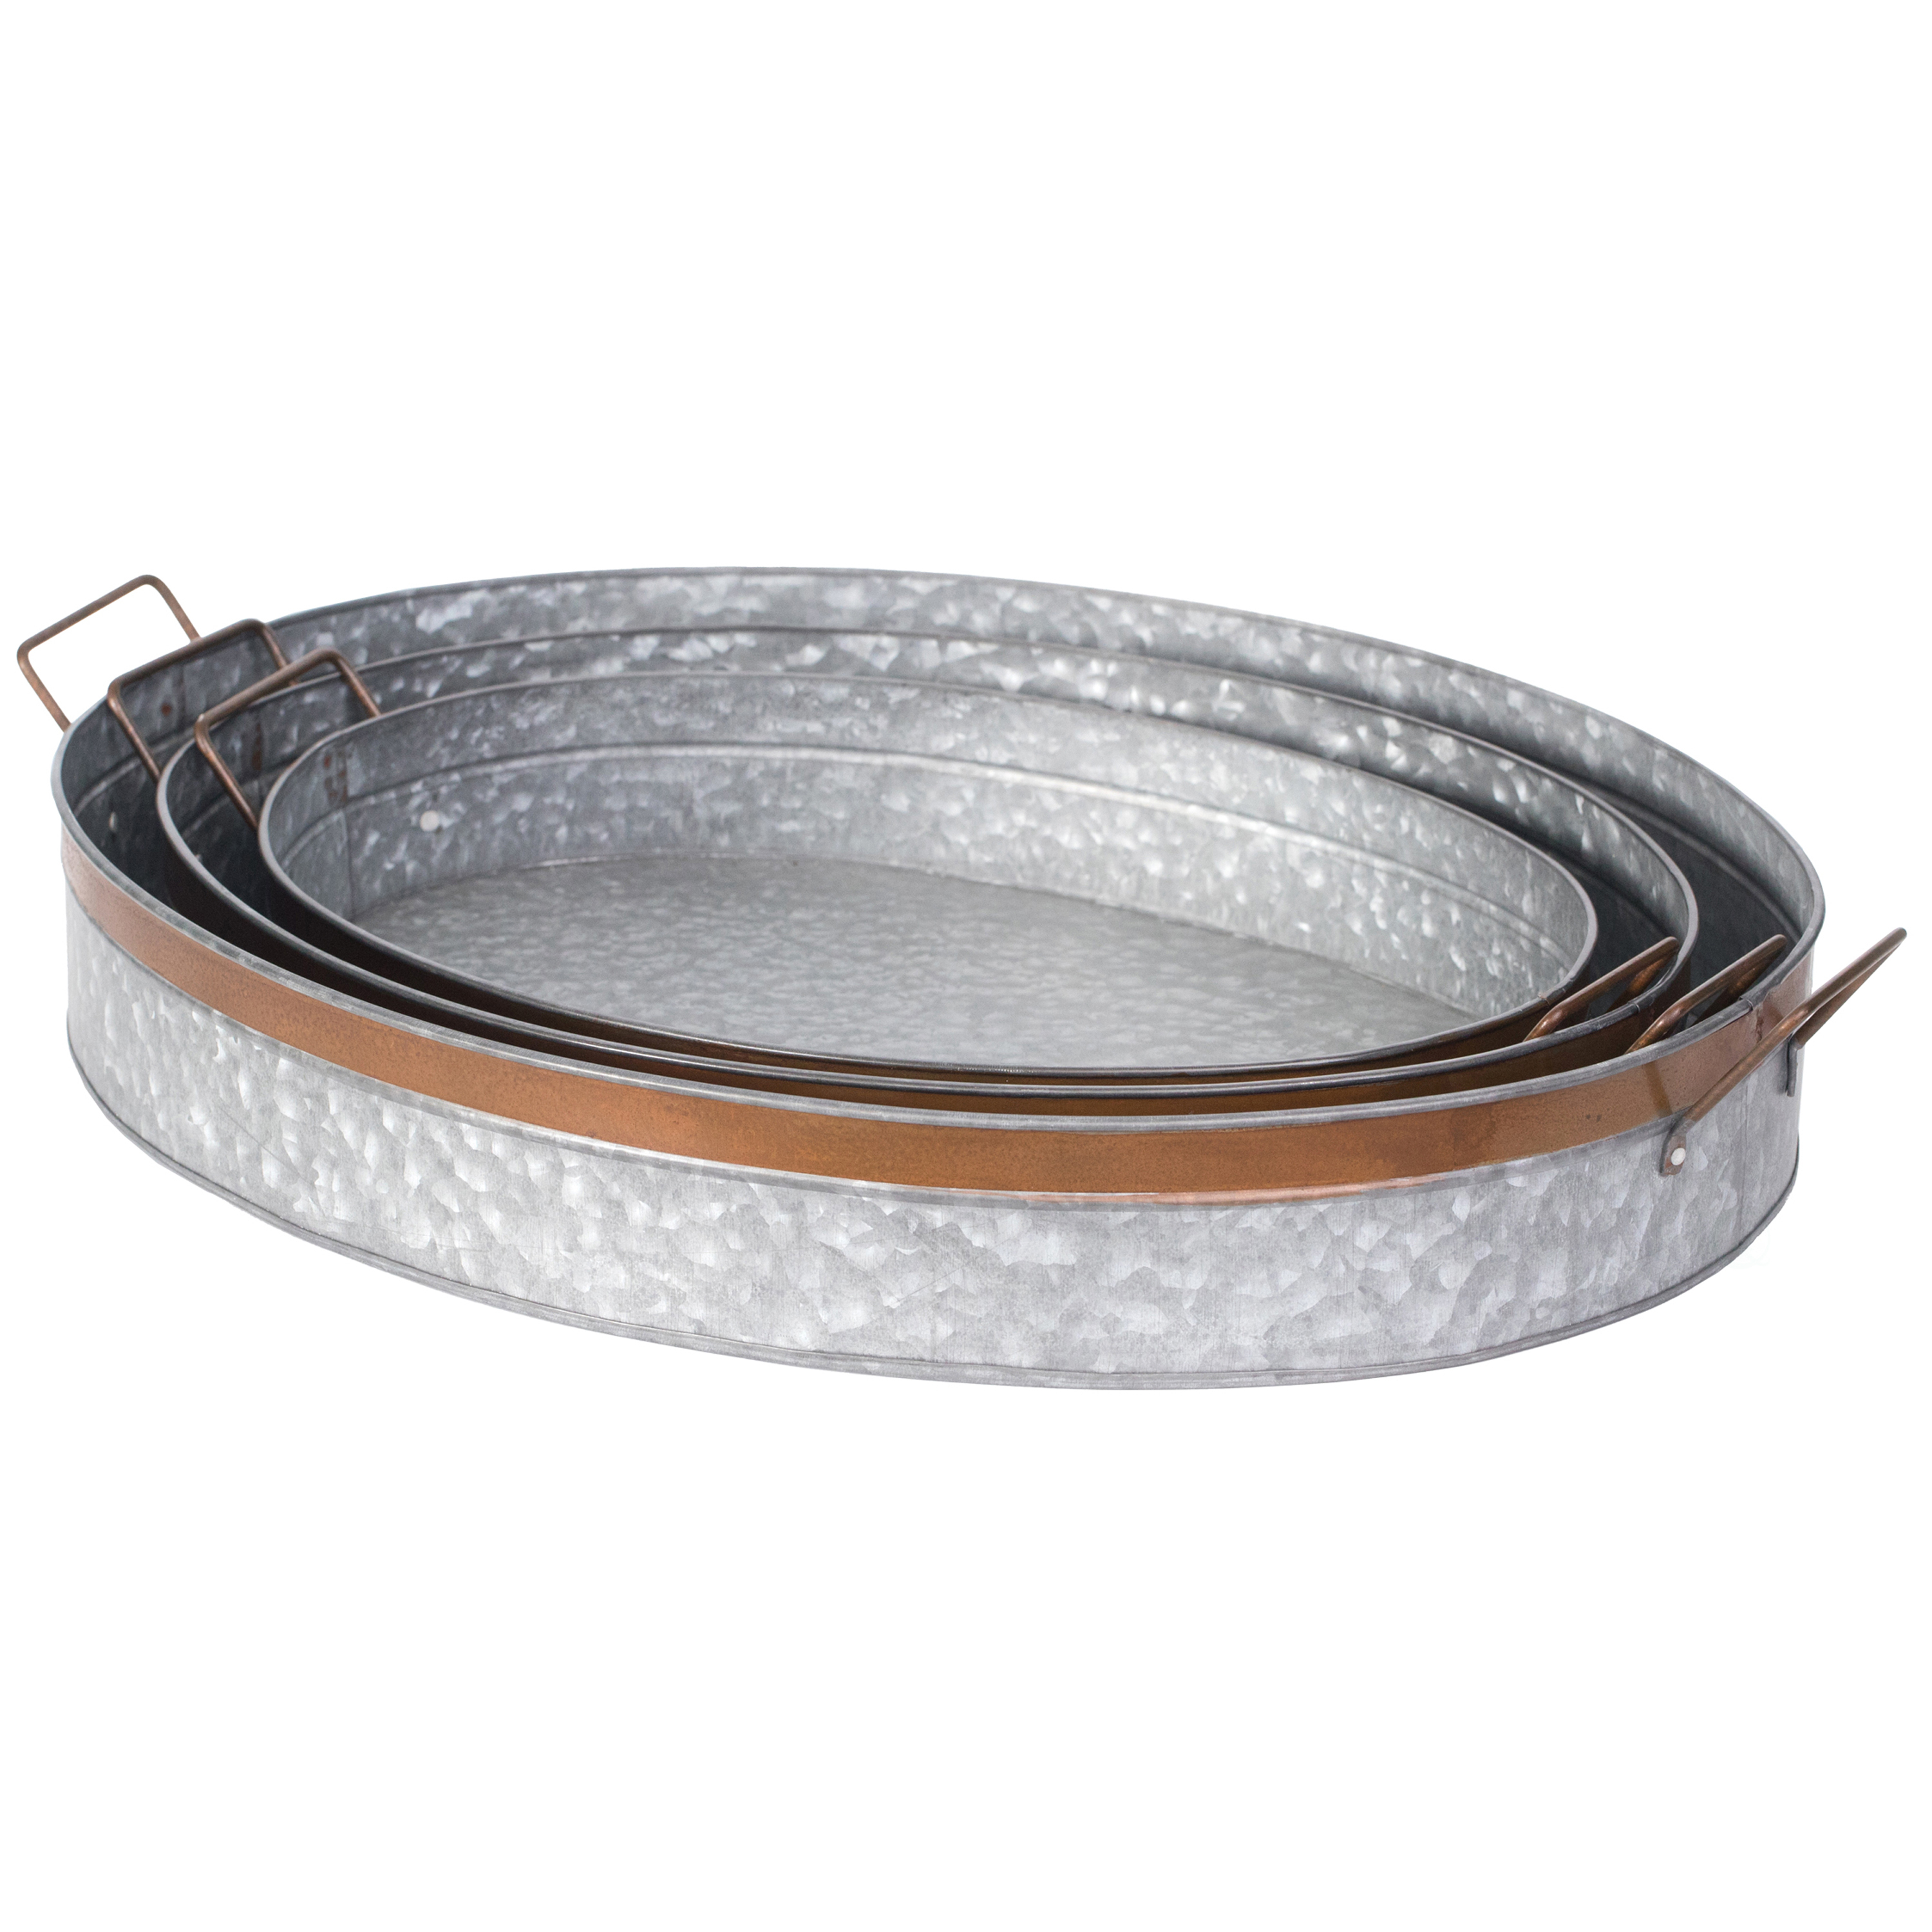 Galvanized Metal Oval Rustic Serving Tray With Handles - Small